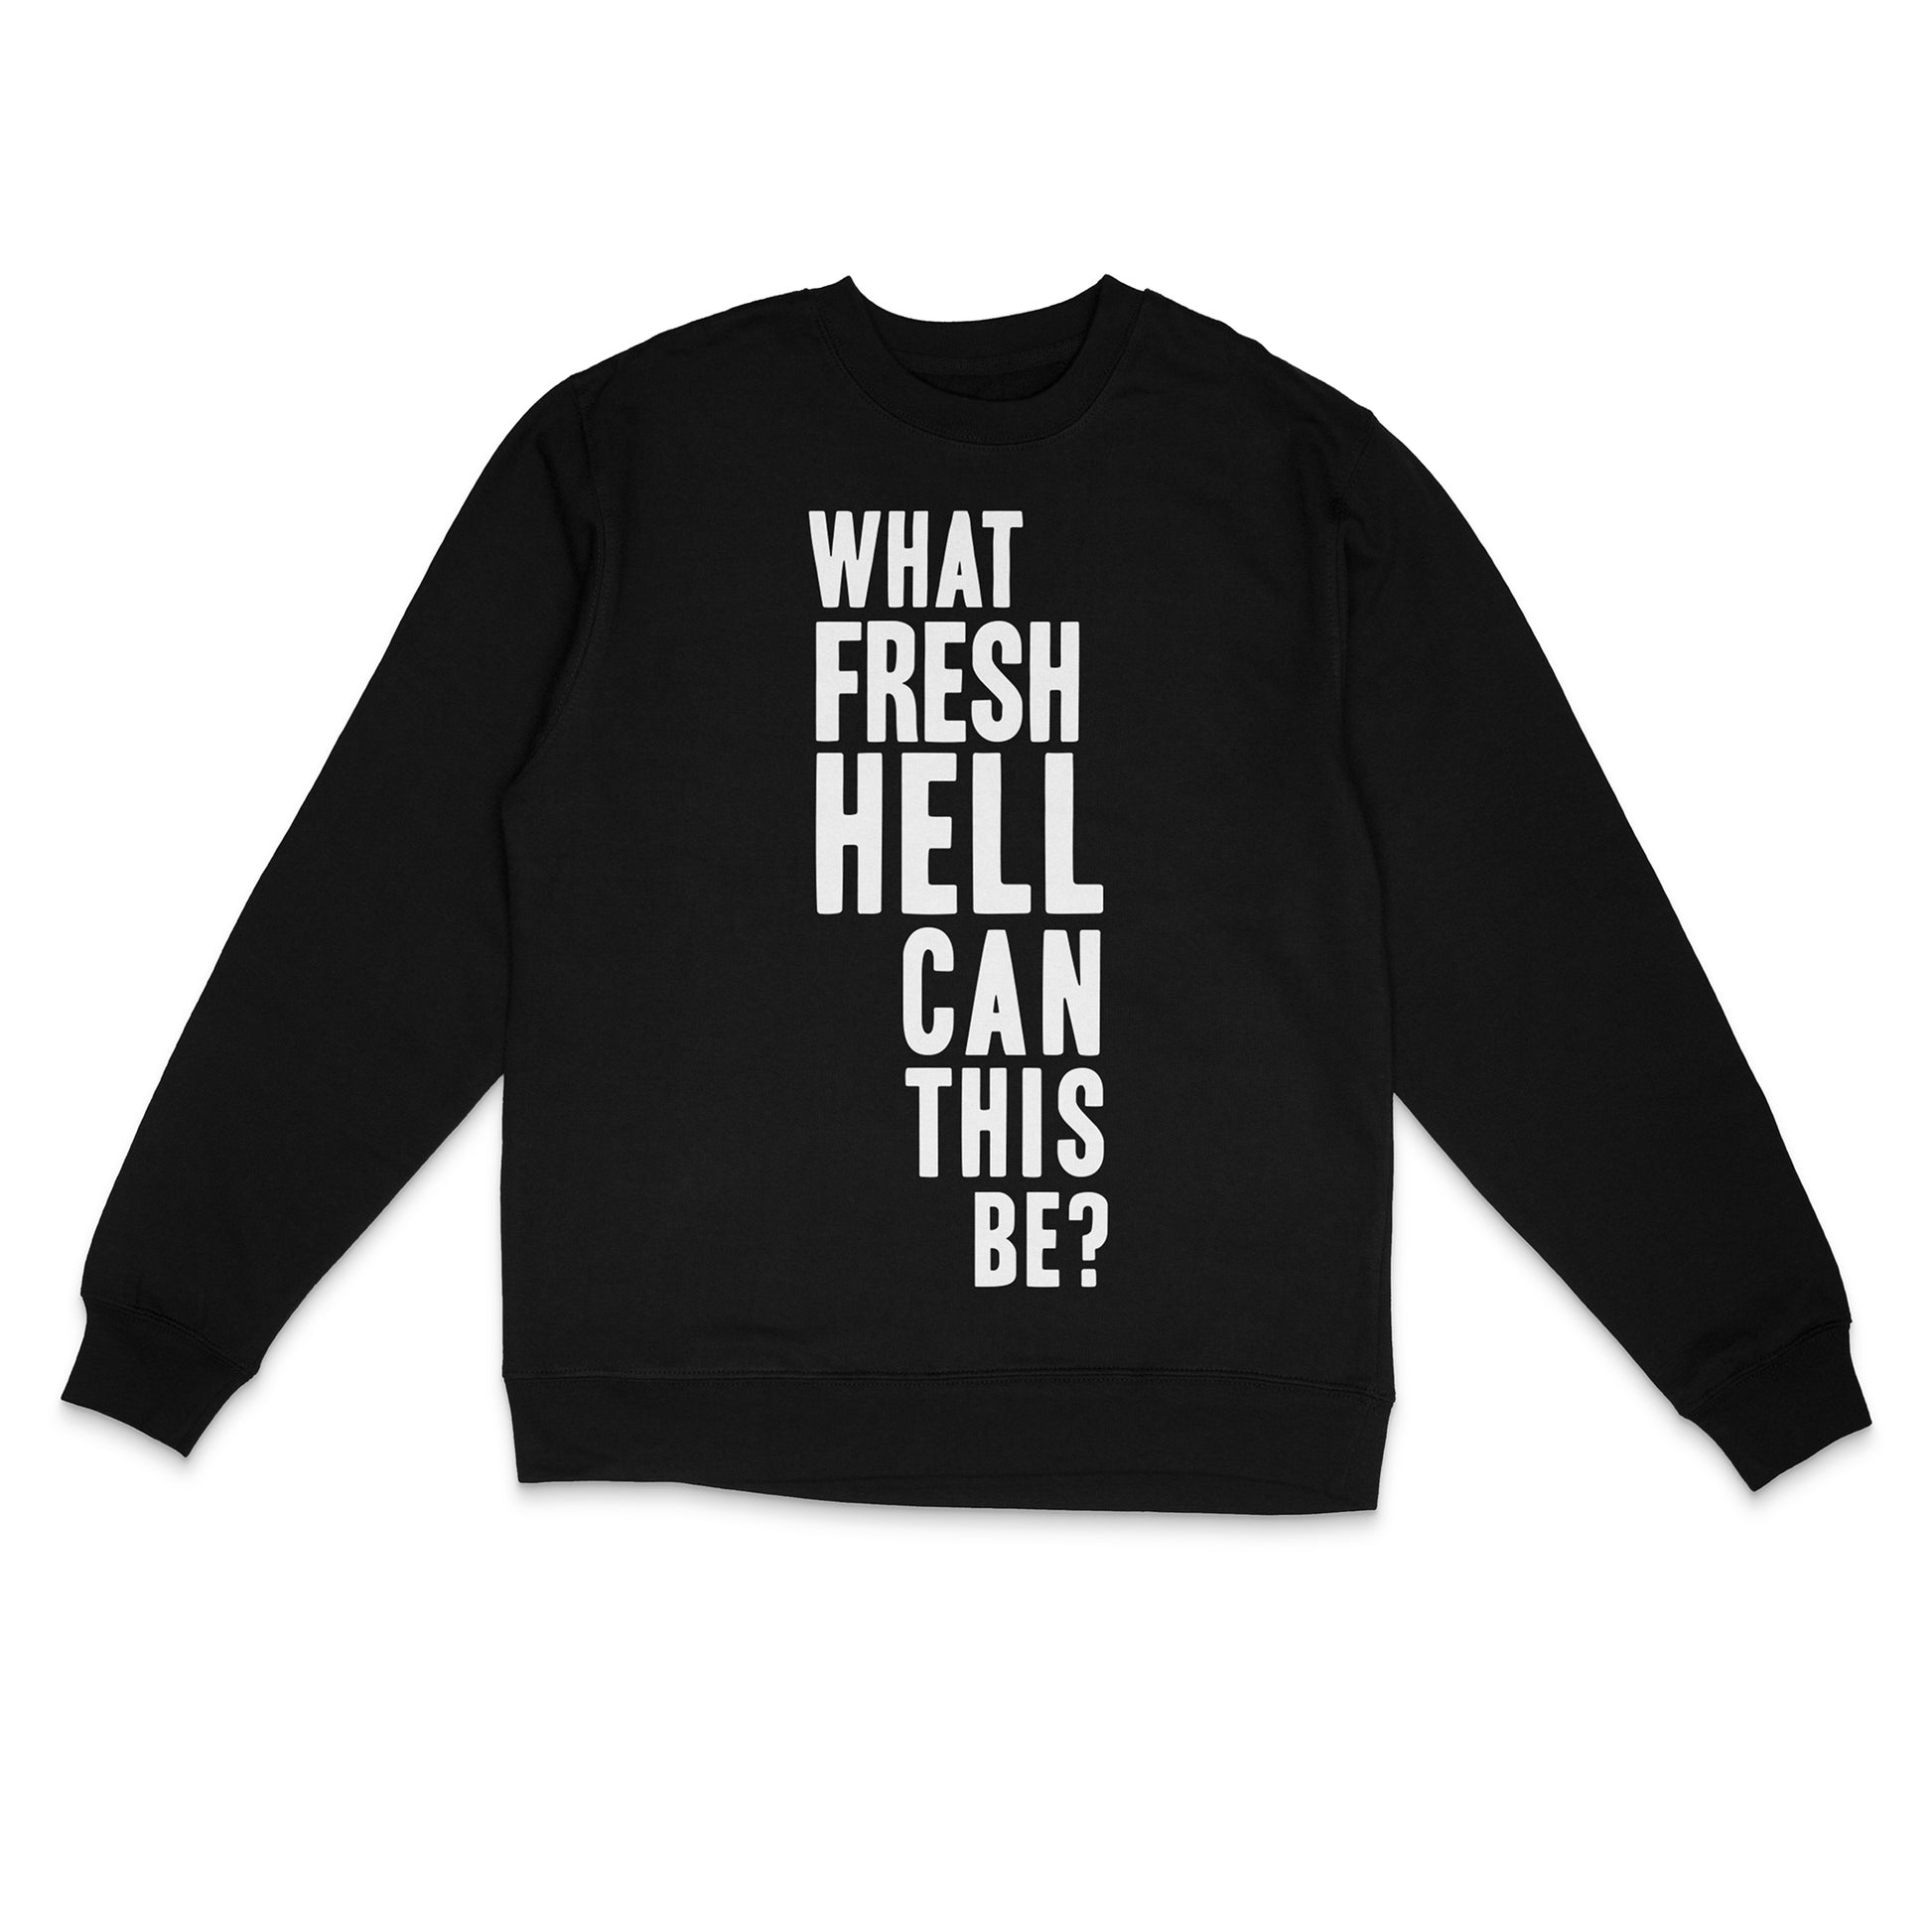 Black crewneck sweatshirt with "What Fresh Hell Can This Be?" text in white vinyl by BBJ / Glitter Garage